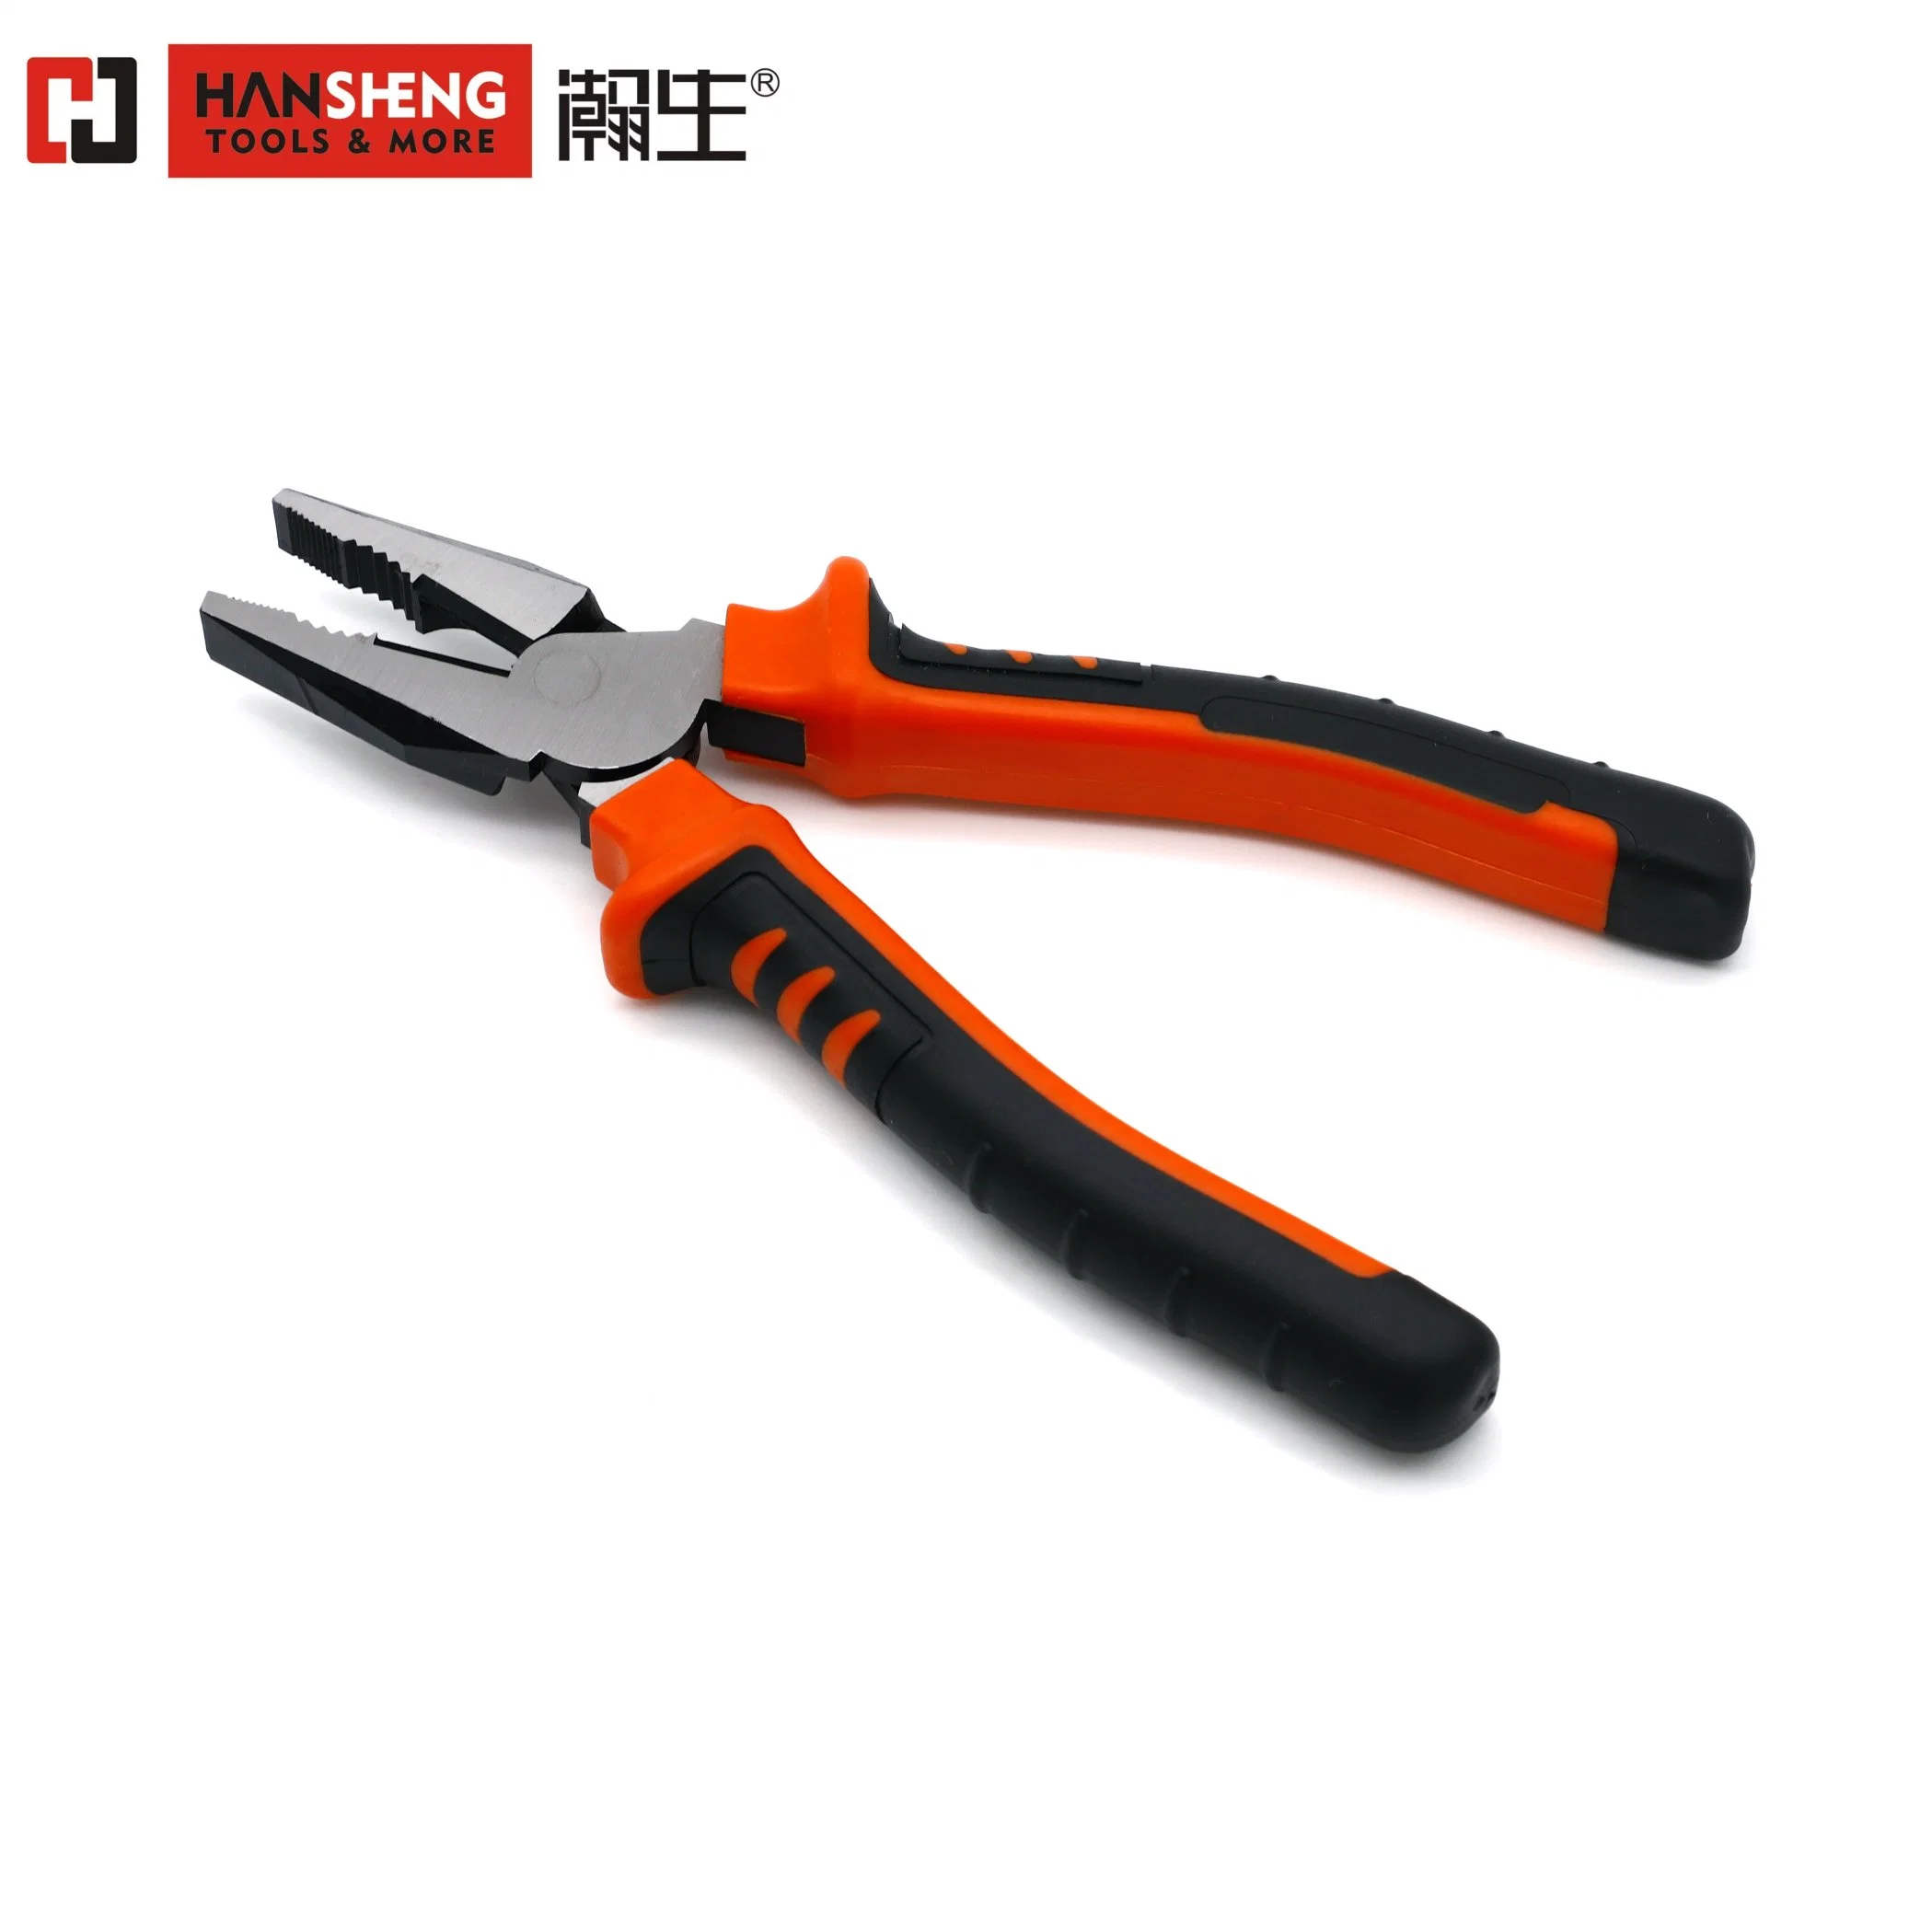 6", 7", 8", Professional Combination Pliers, Hand Tools,Hardware Tool,Pliers,Cutting Tool,Made of Carbon Steel, CRV, PVC Handles, German Type,Combination Plier